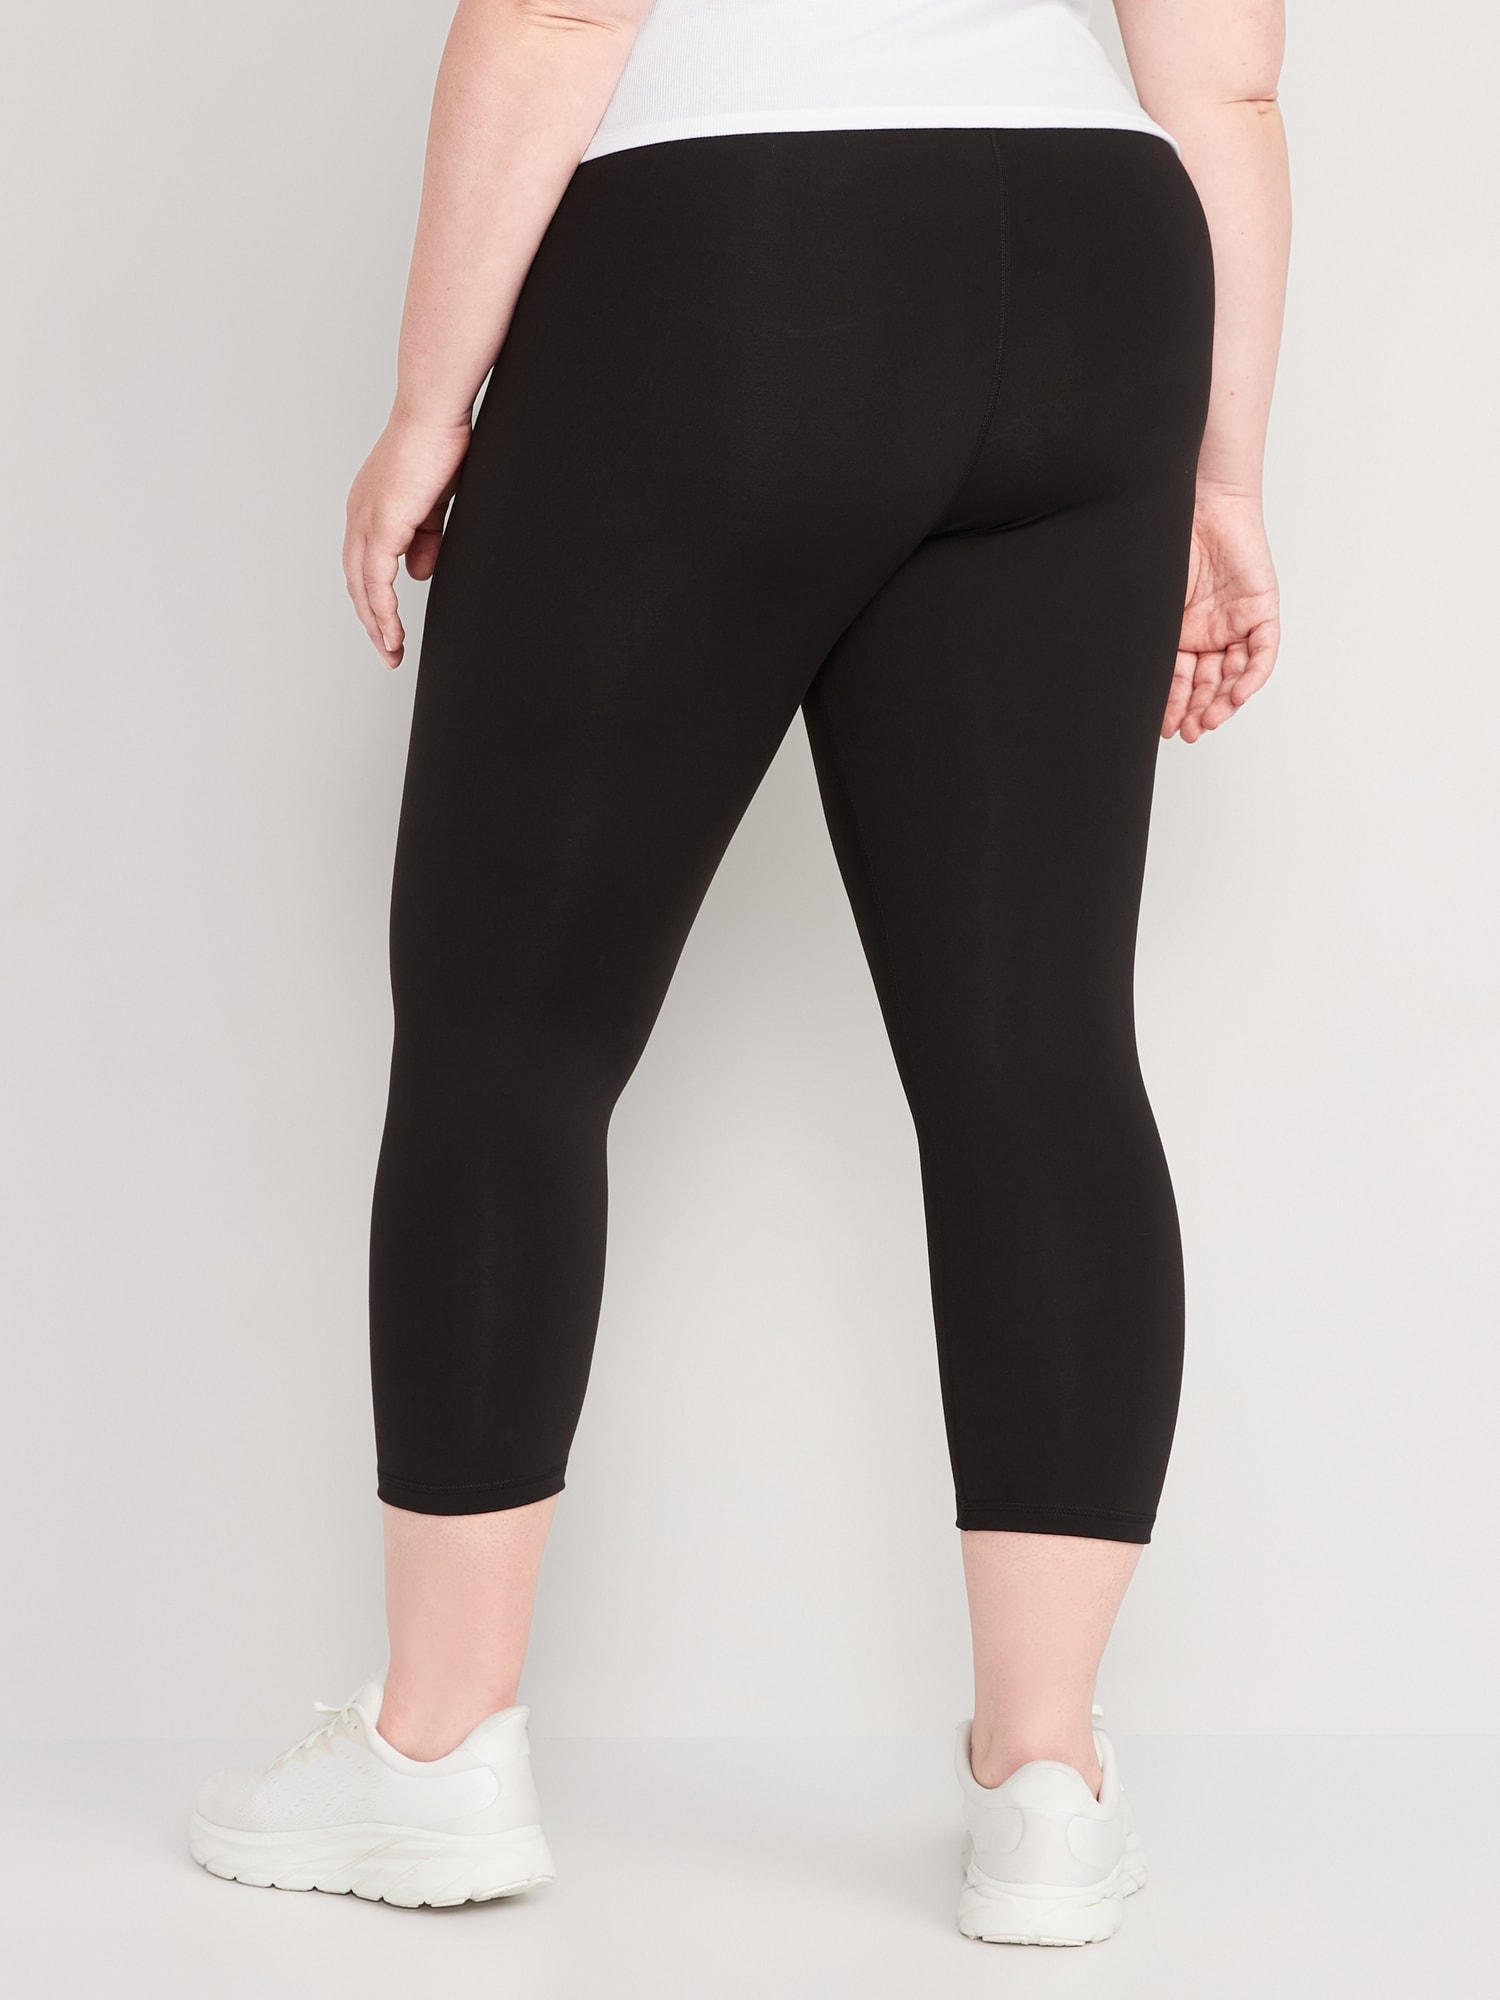 I got these @oldnavy high-waisted PowerPress leggings for $2.96! They're  actually better than some of my more expensive leggings. I hop